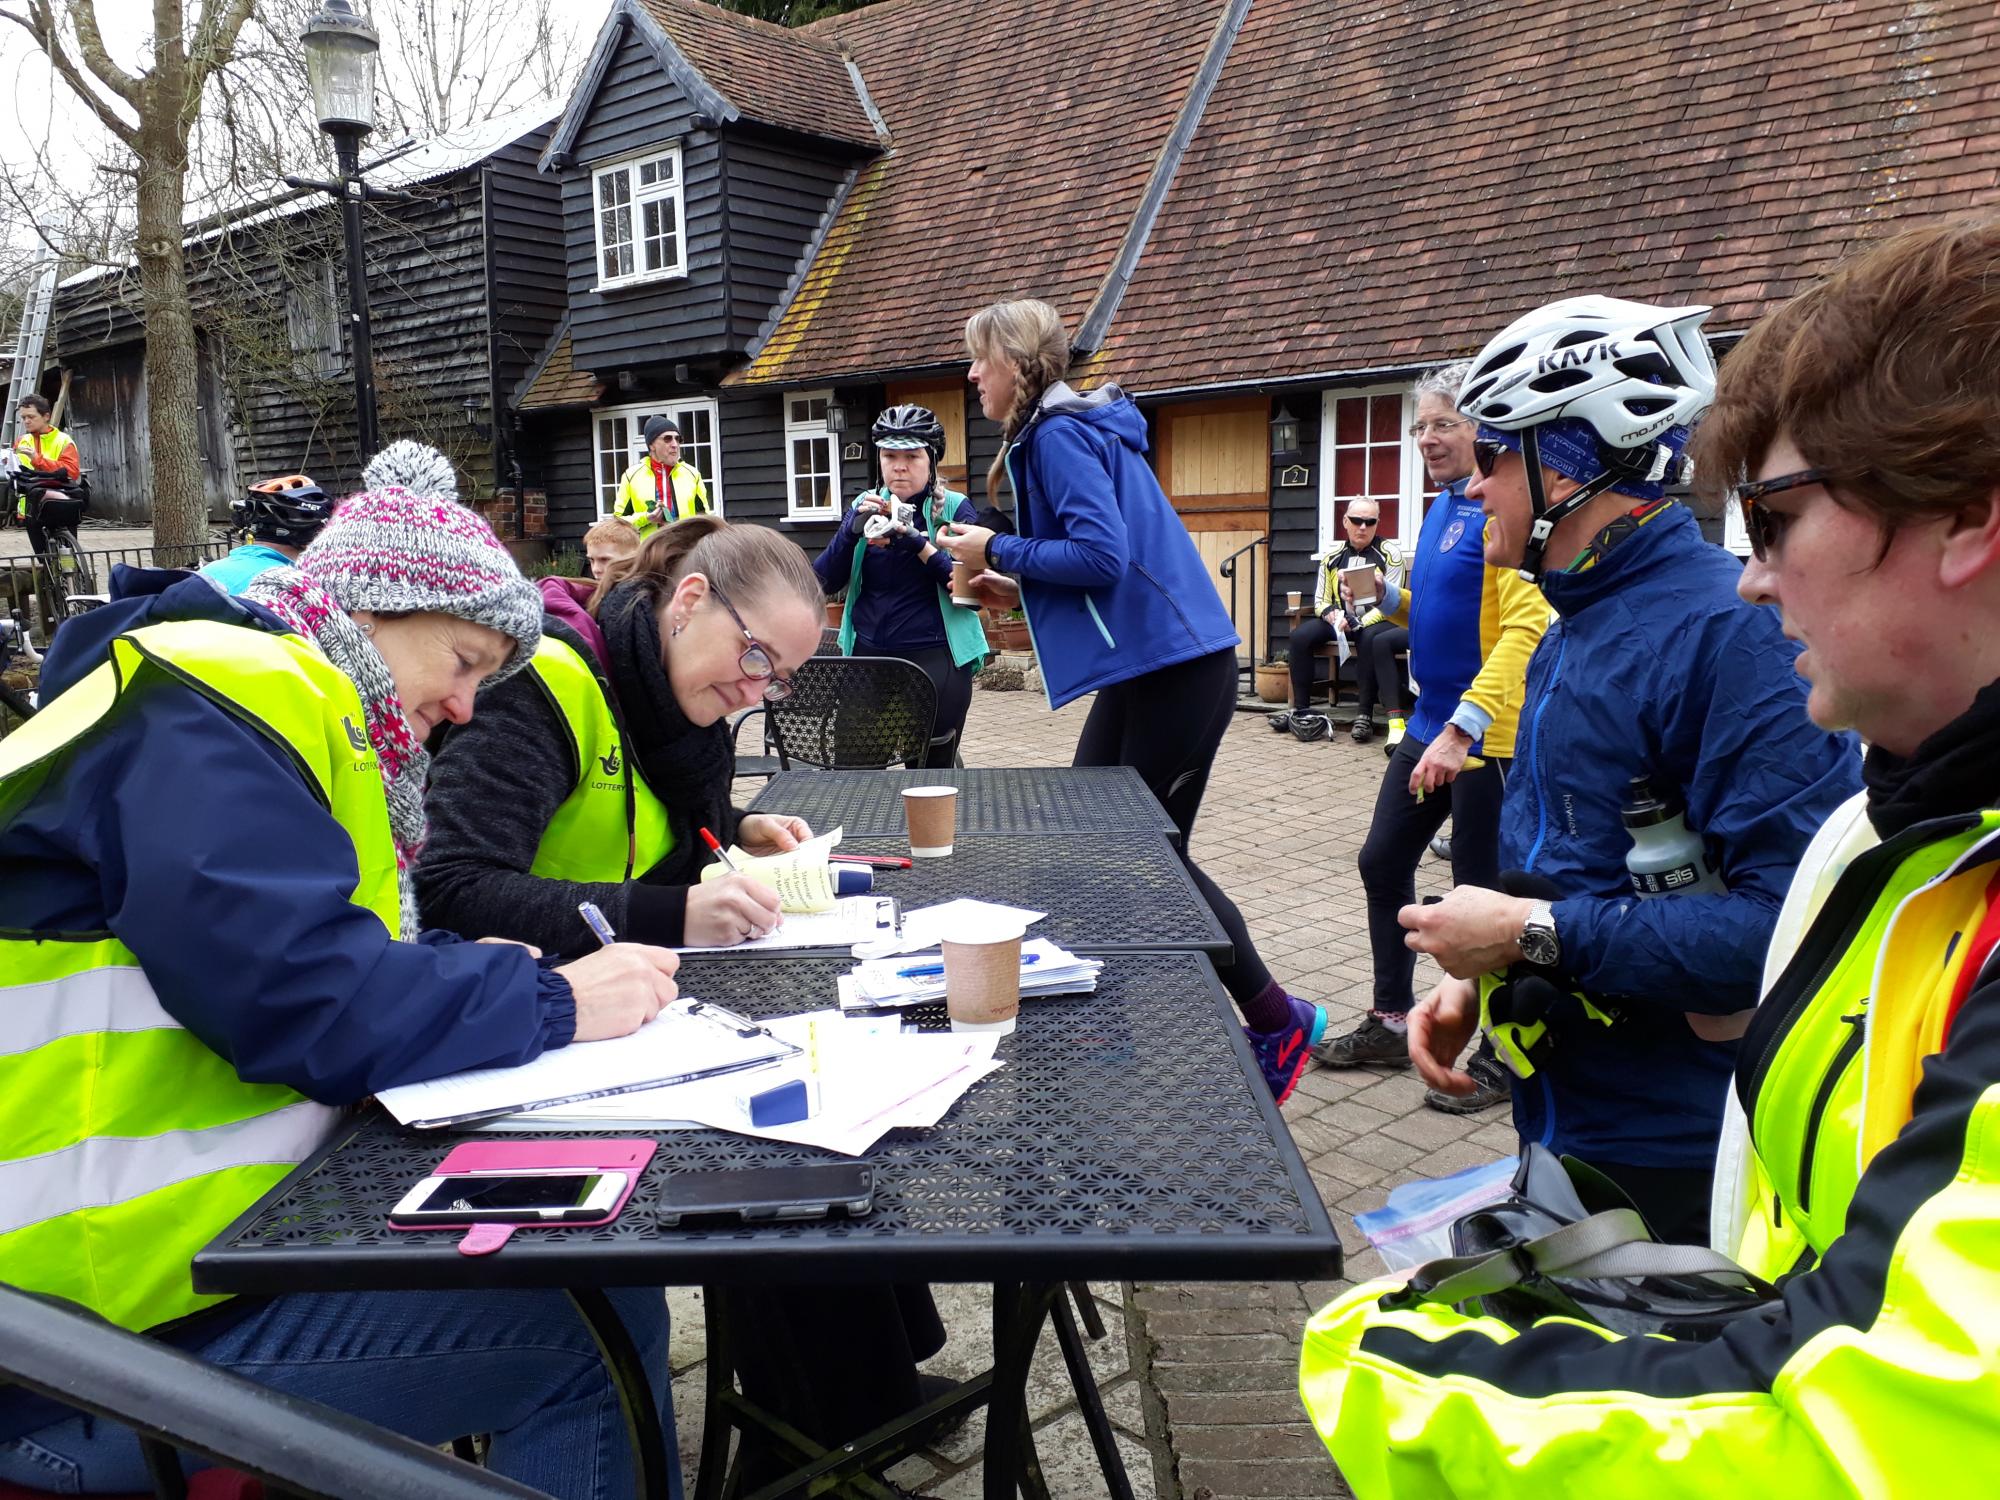 Some of the amazing volunteers checking riders in